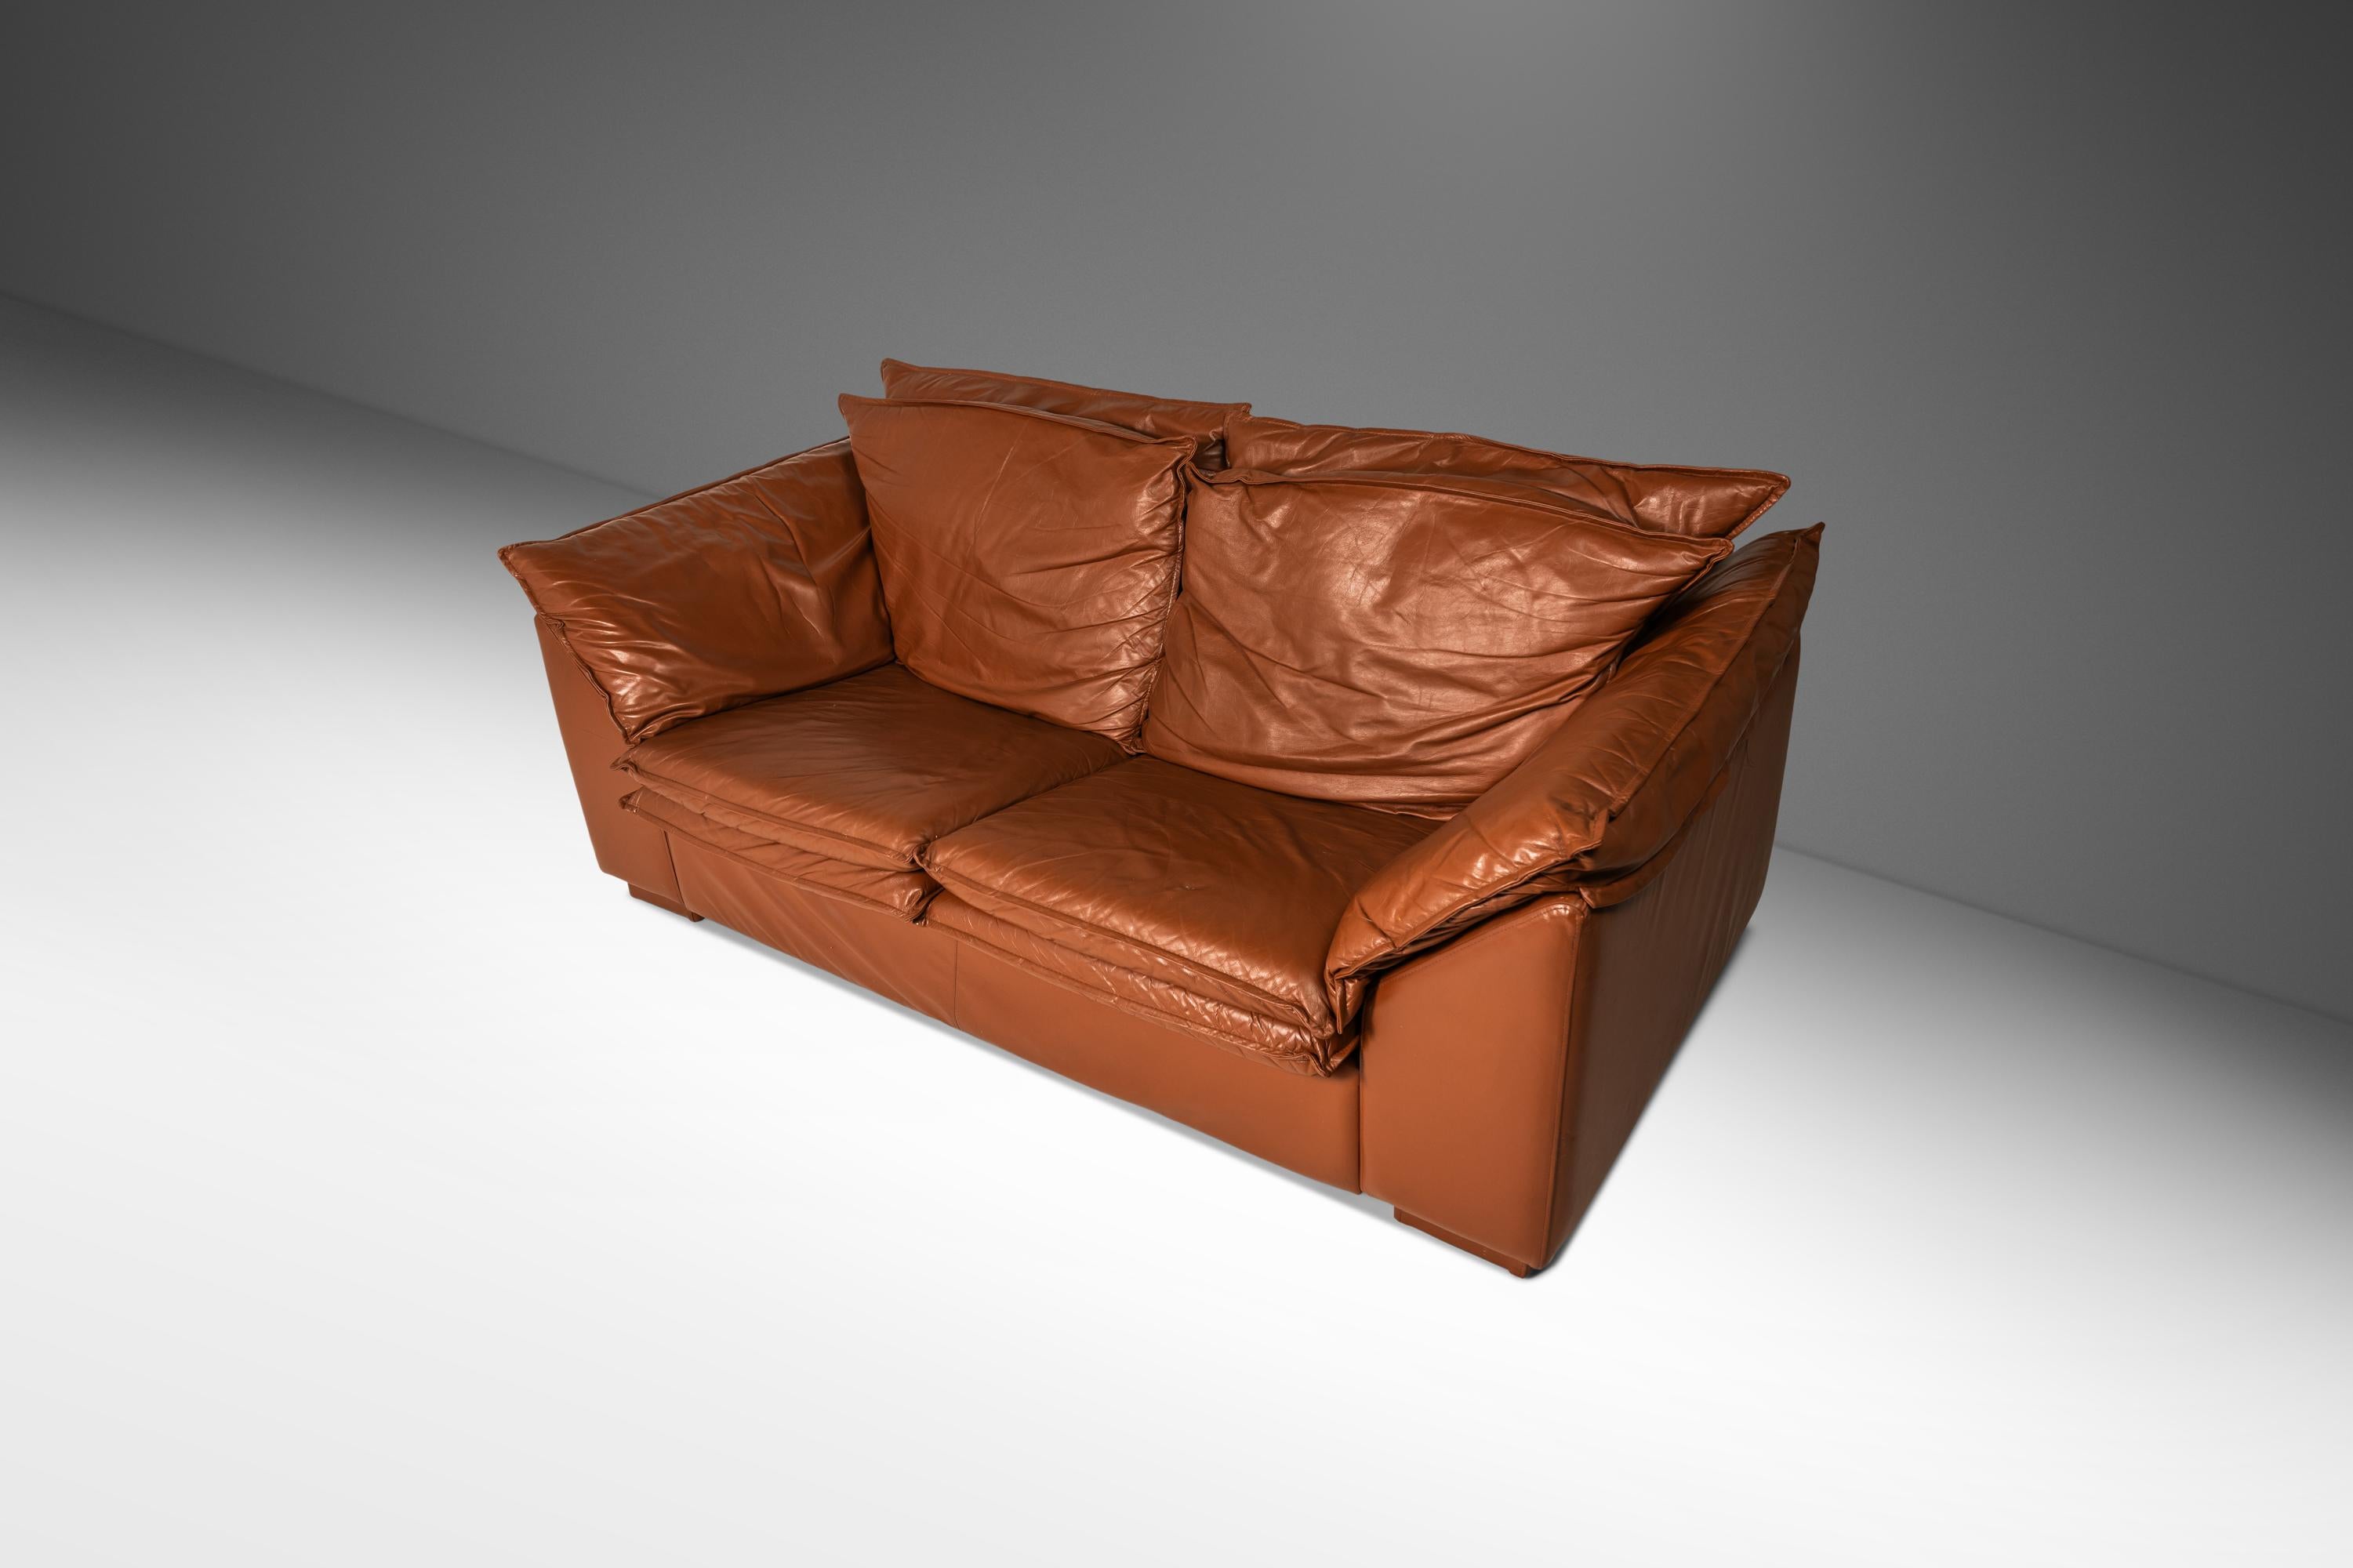 Low Profile Loveseat Sofa in Leather in the Manner of Niels Eilersen, c. 1980's For Sale 4